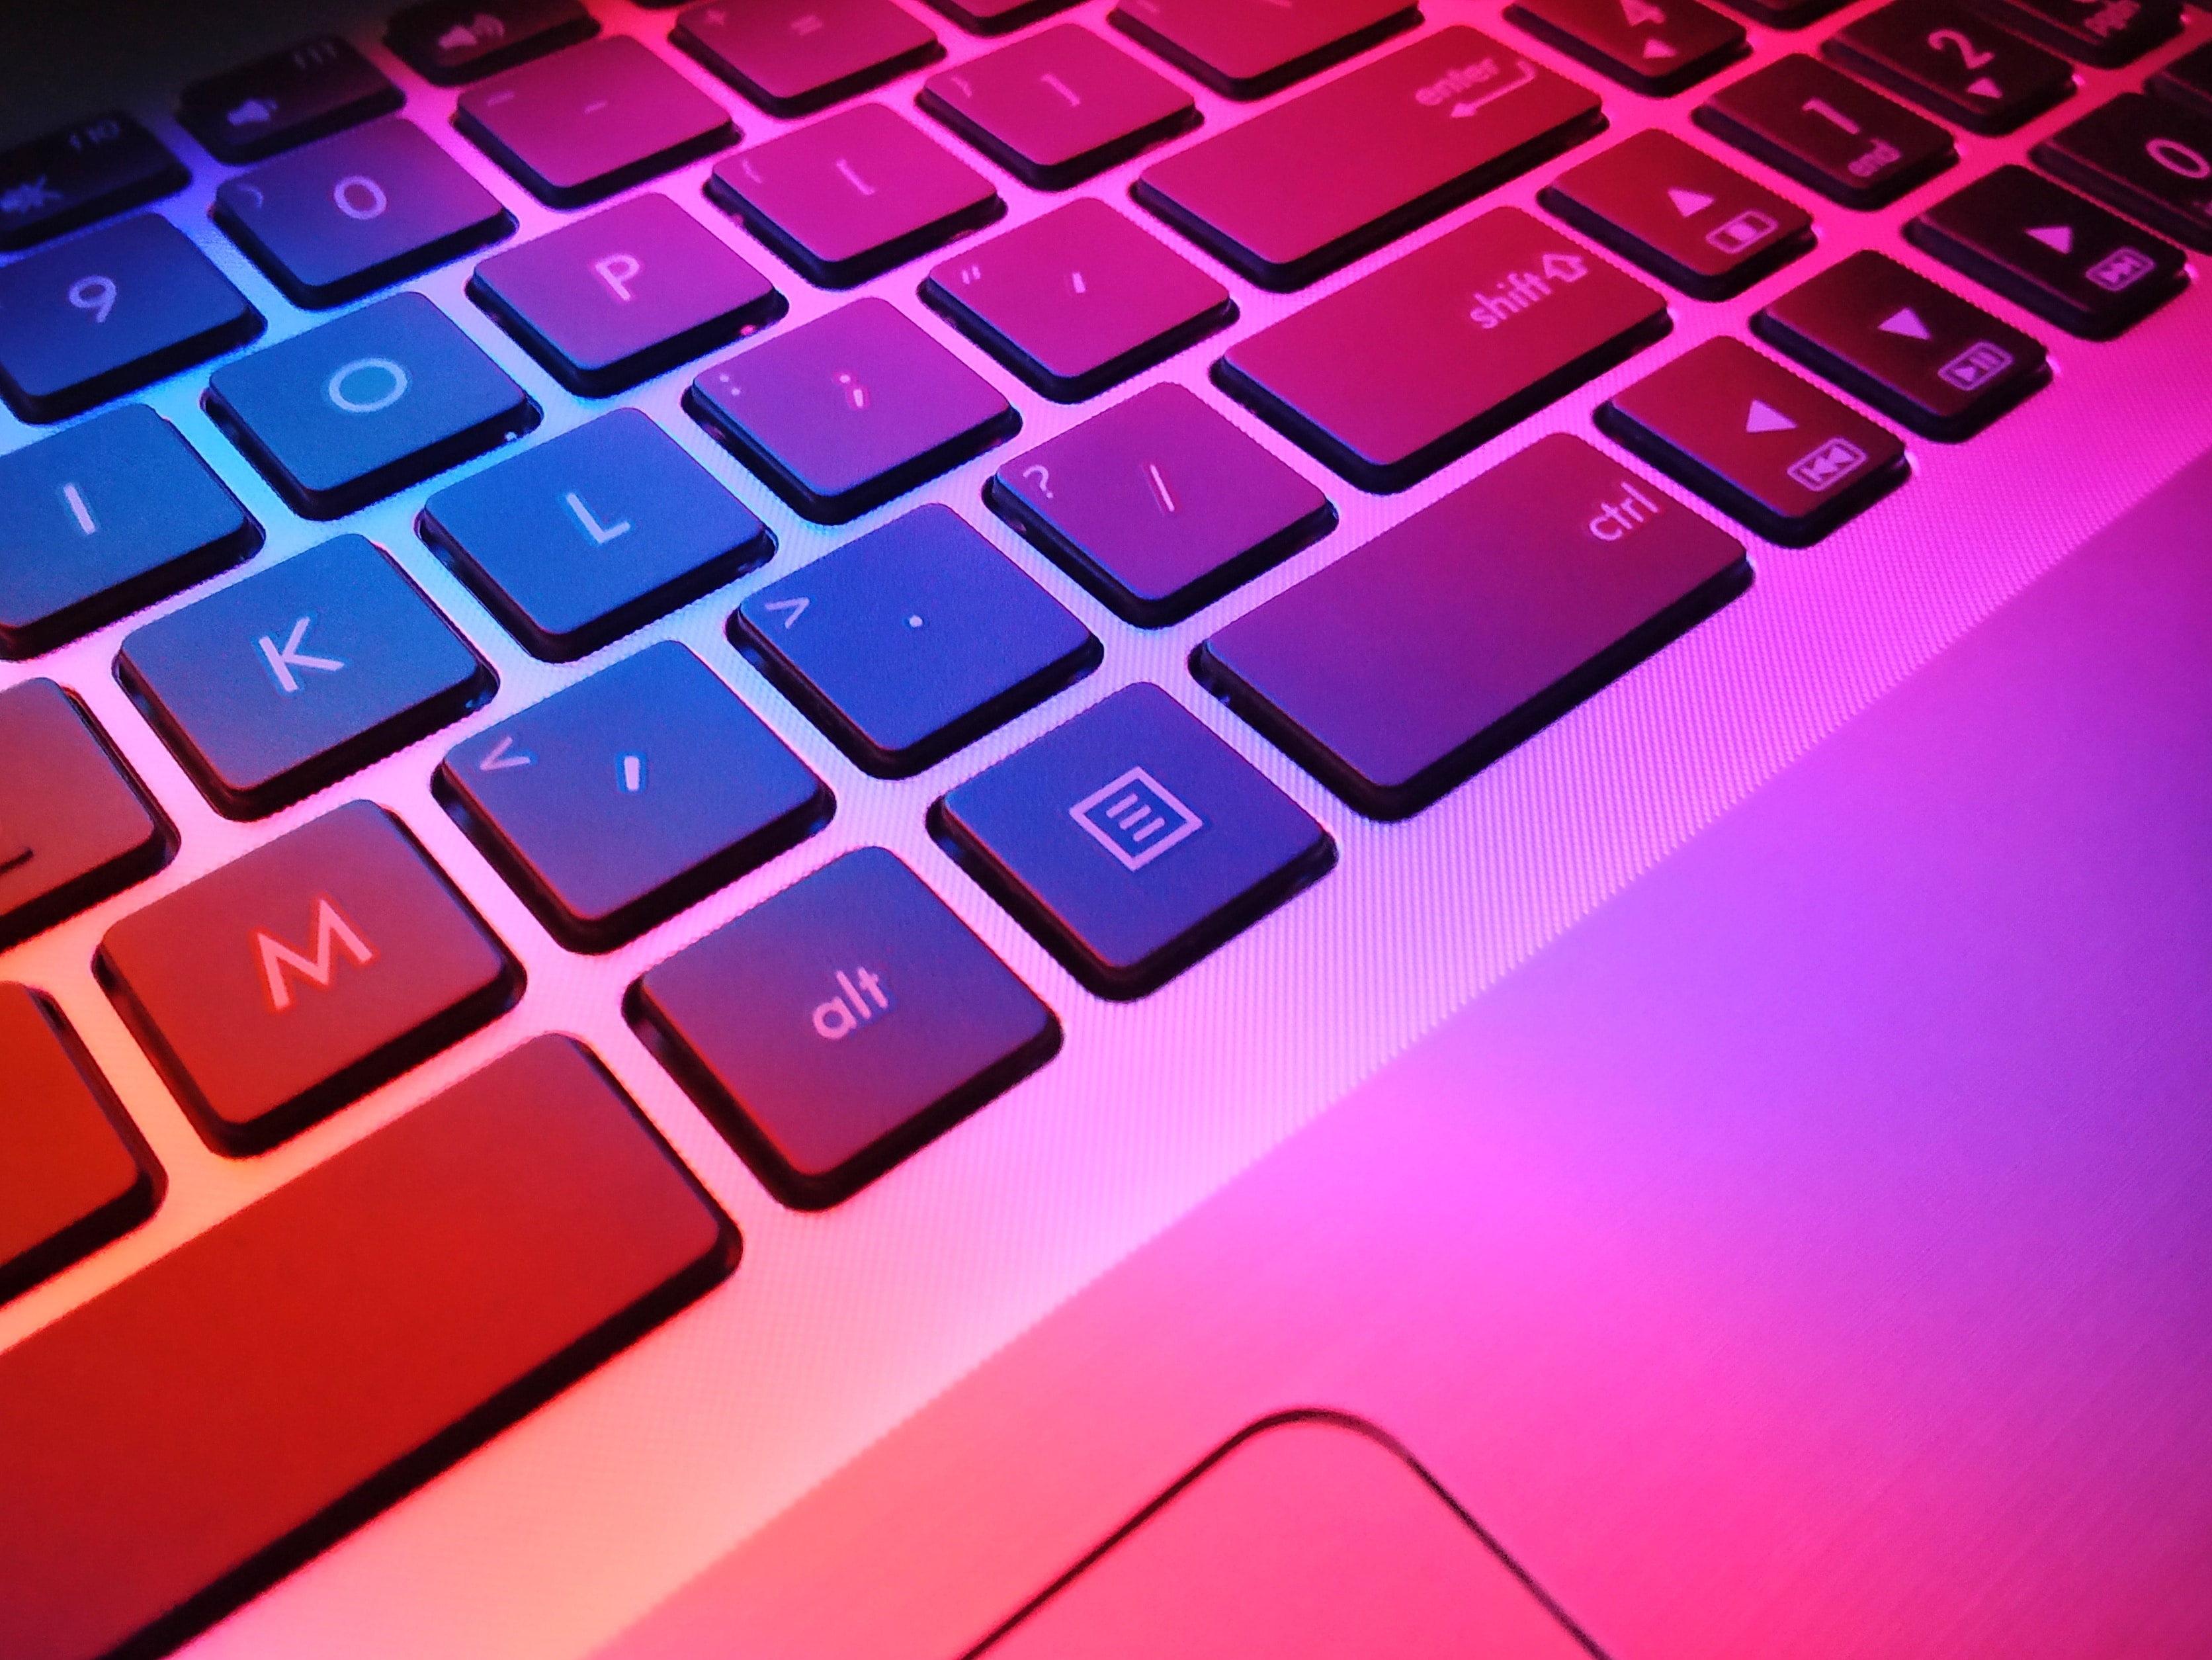 Laptop keyboard with pink and red lighting